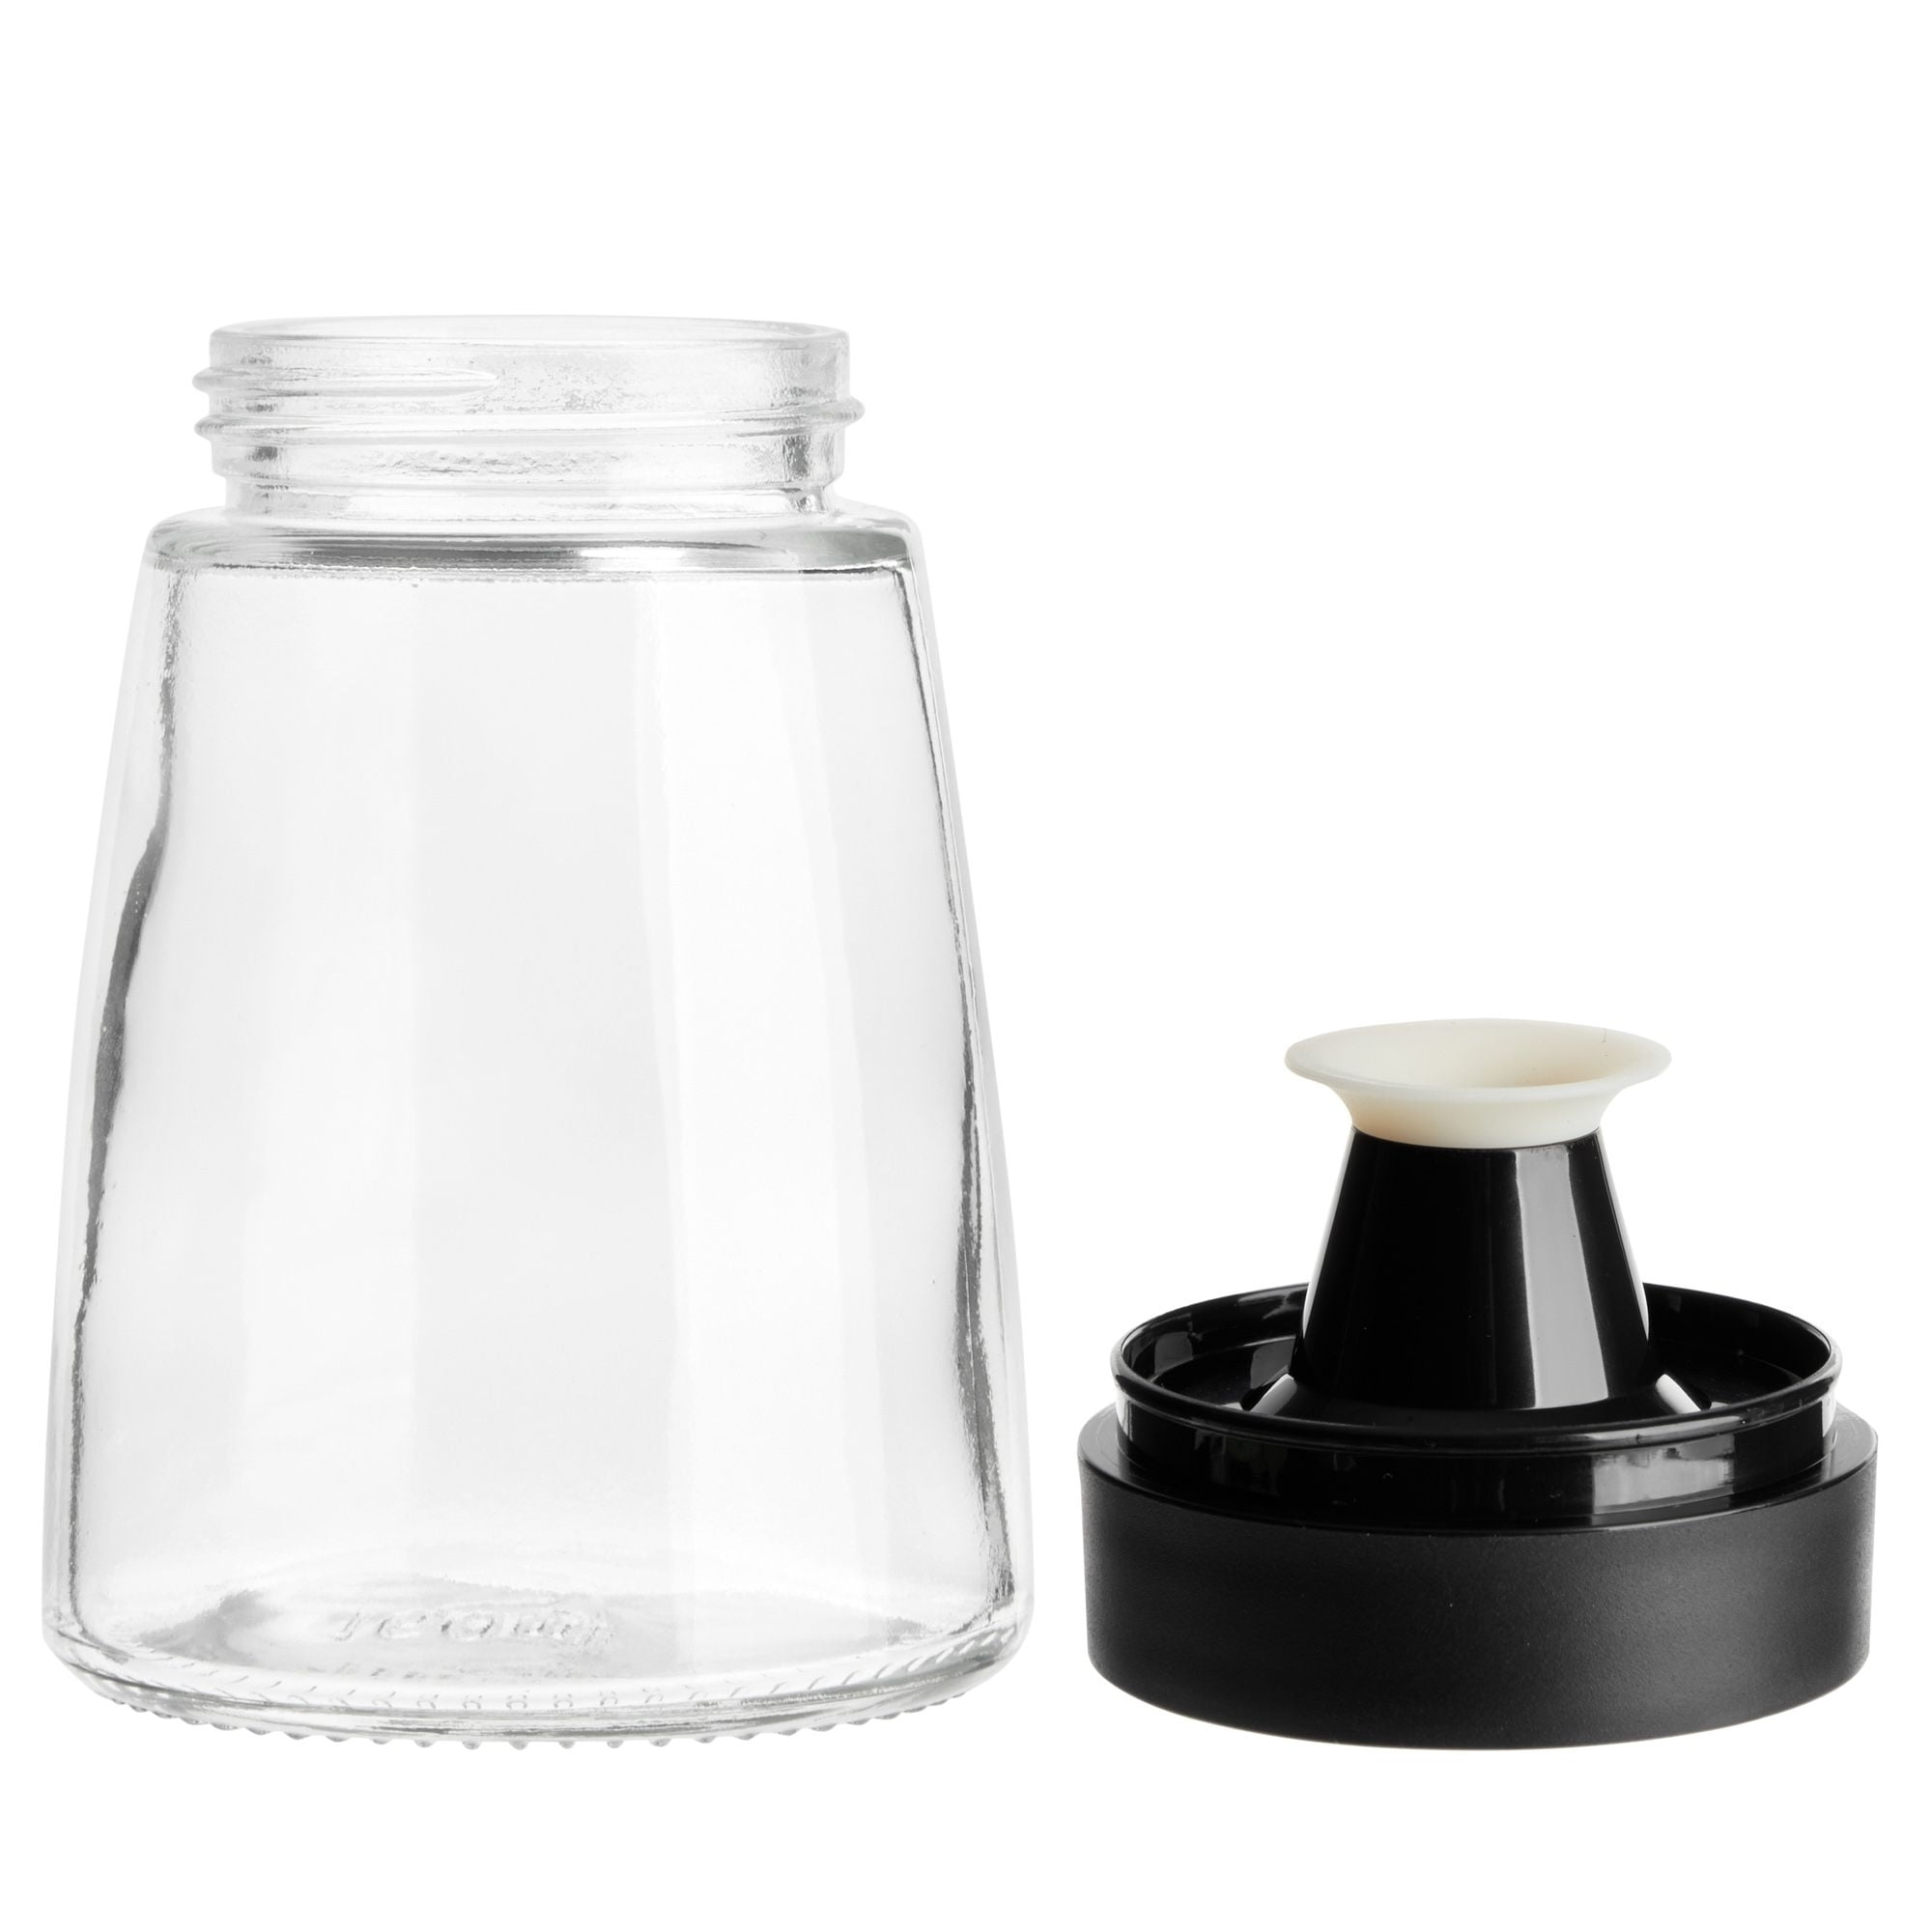 Juvale 2 Piece Small Oil and Vinegar Dispenser Set for Kitchen, Glass Cruet  Bottles with No Drip Top…See more Juvale 2 Piece Small Oil and Vinegar